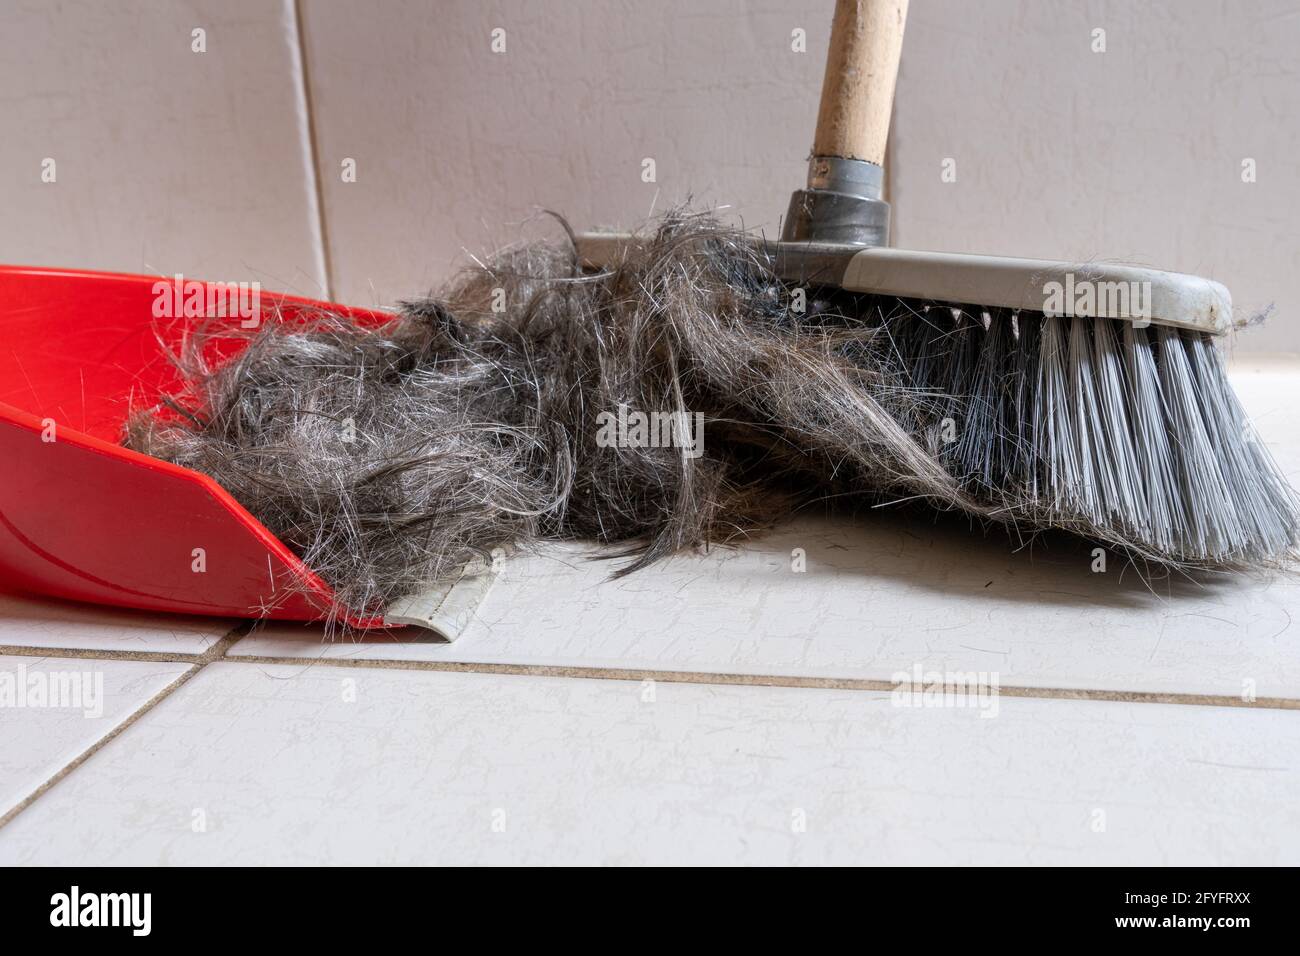 Brush broom with dustpan cleaning human hair Stock Photo